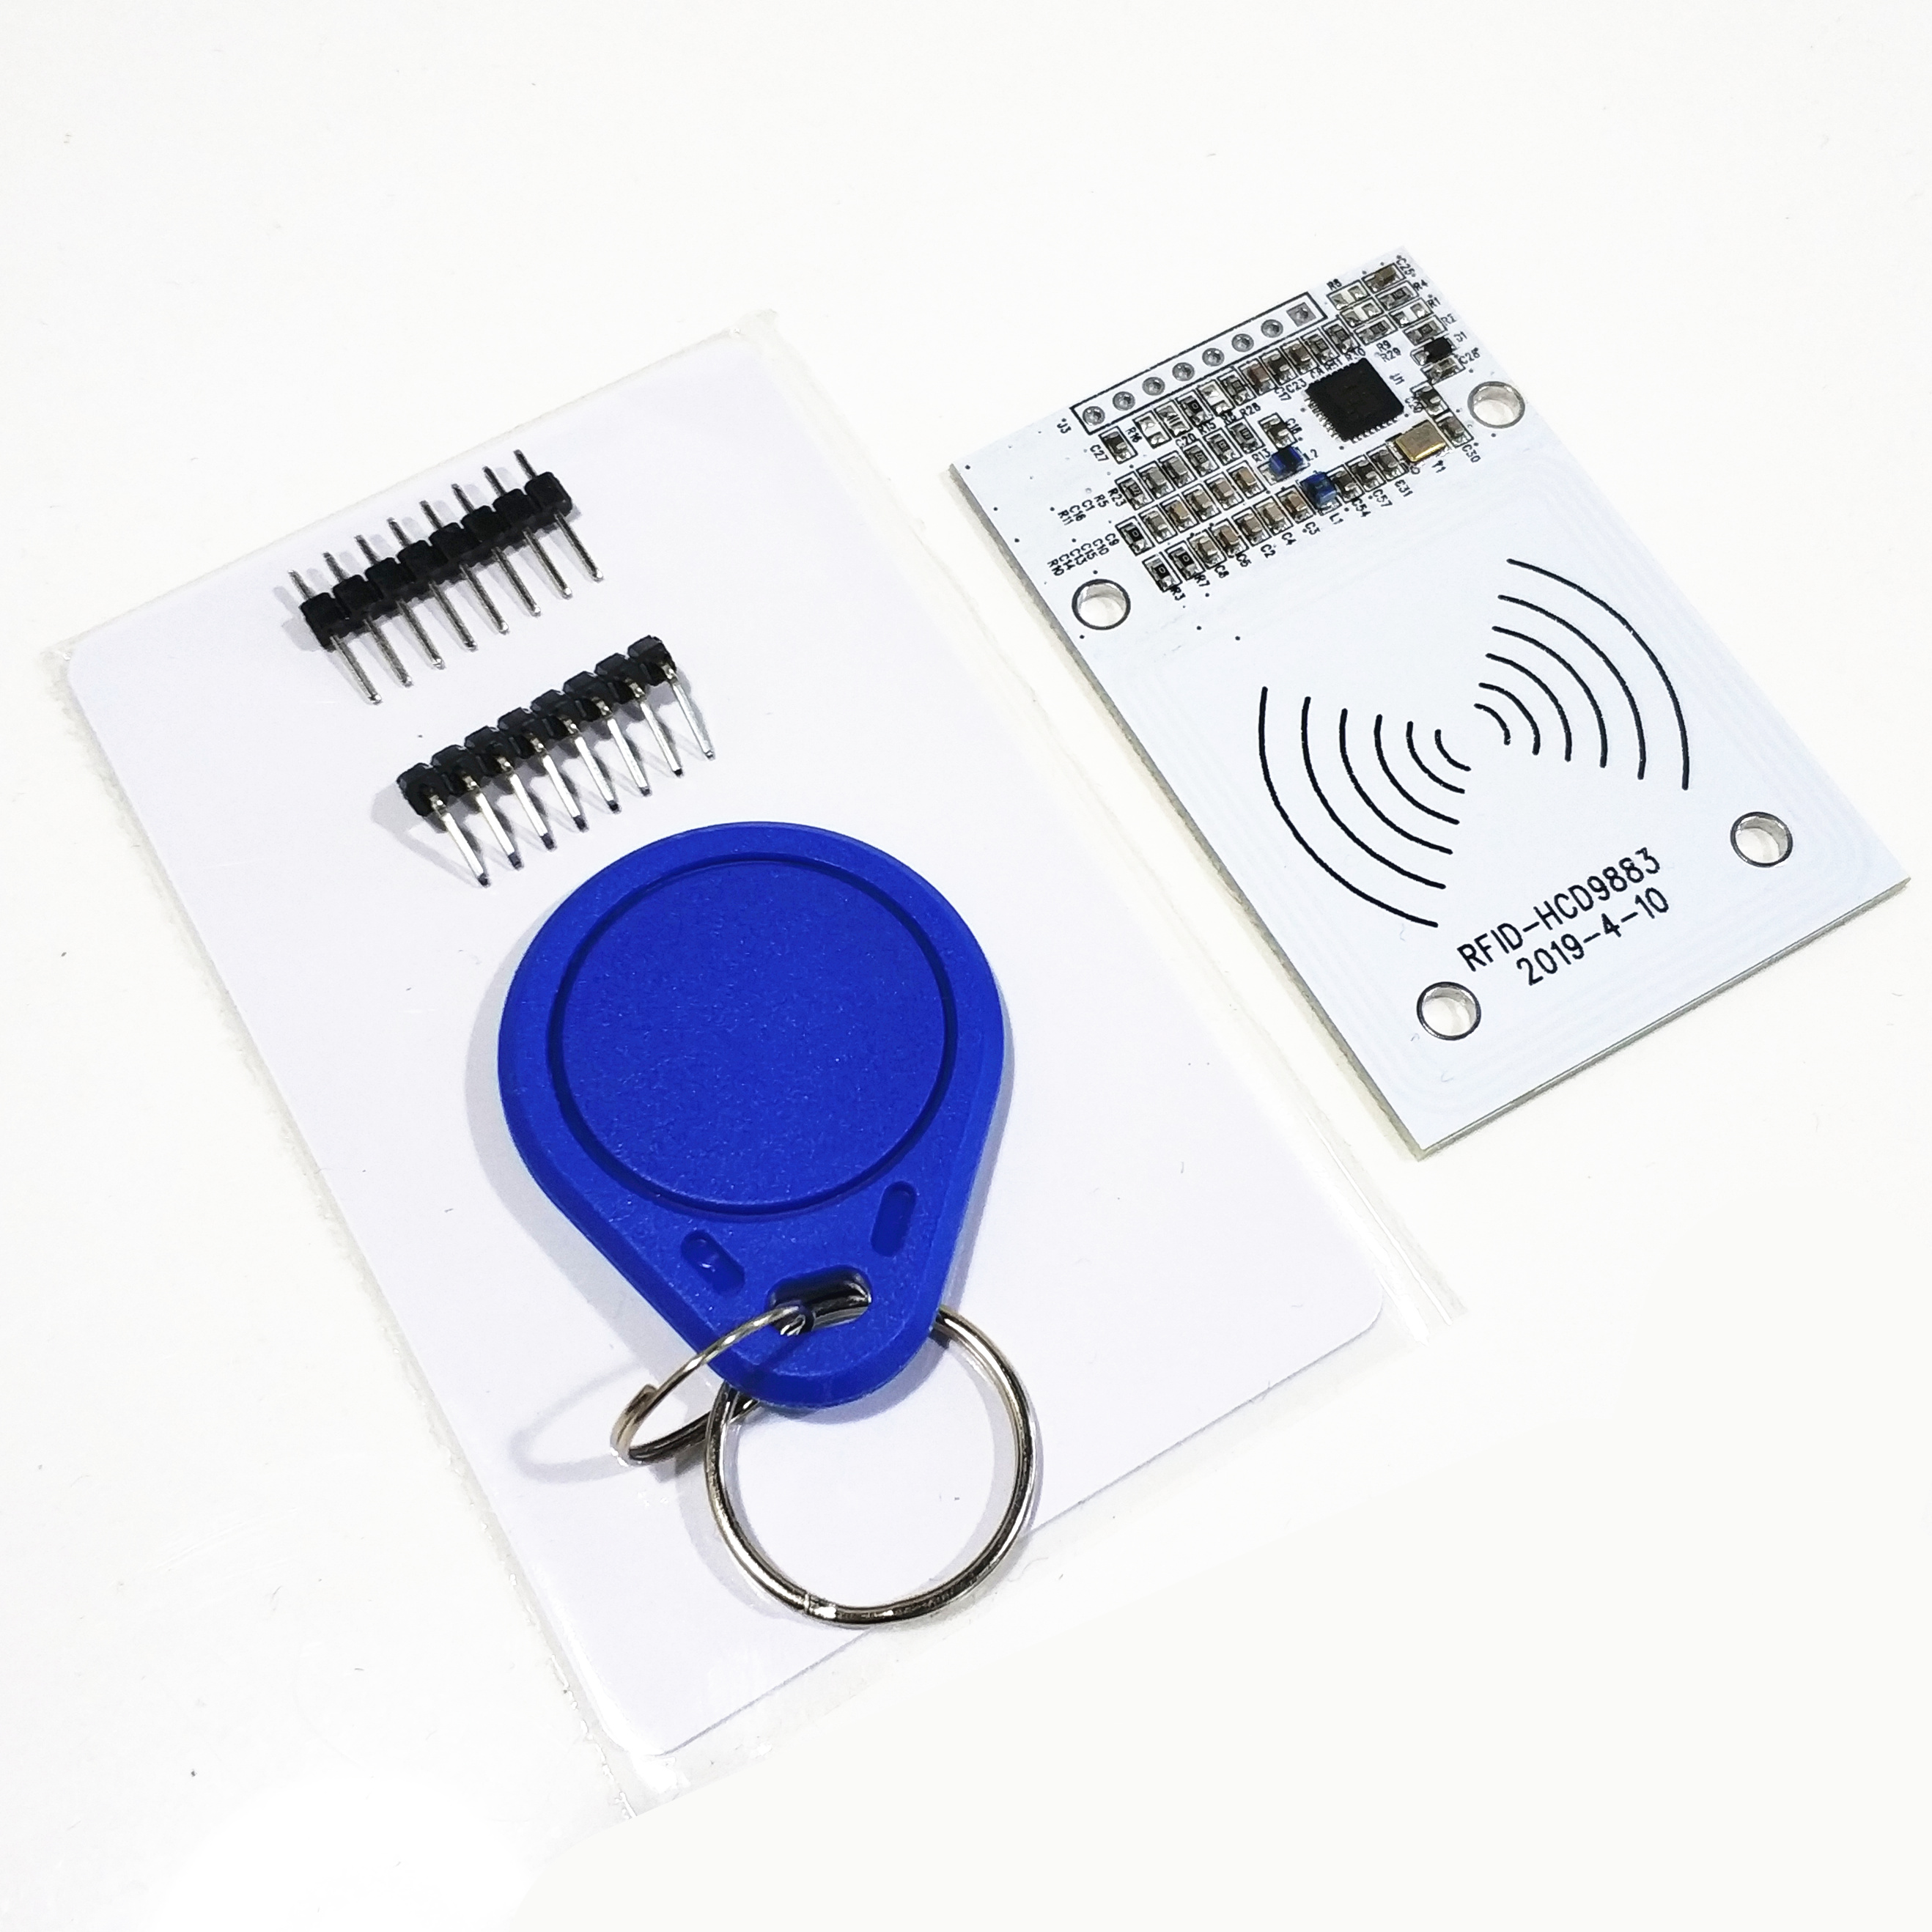 Clrc663 full protocol NFC card reading module IC card reading / writing induction RFID RF rc663 development board